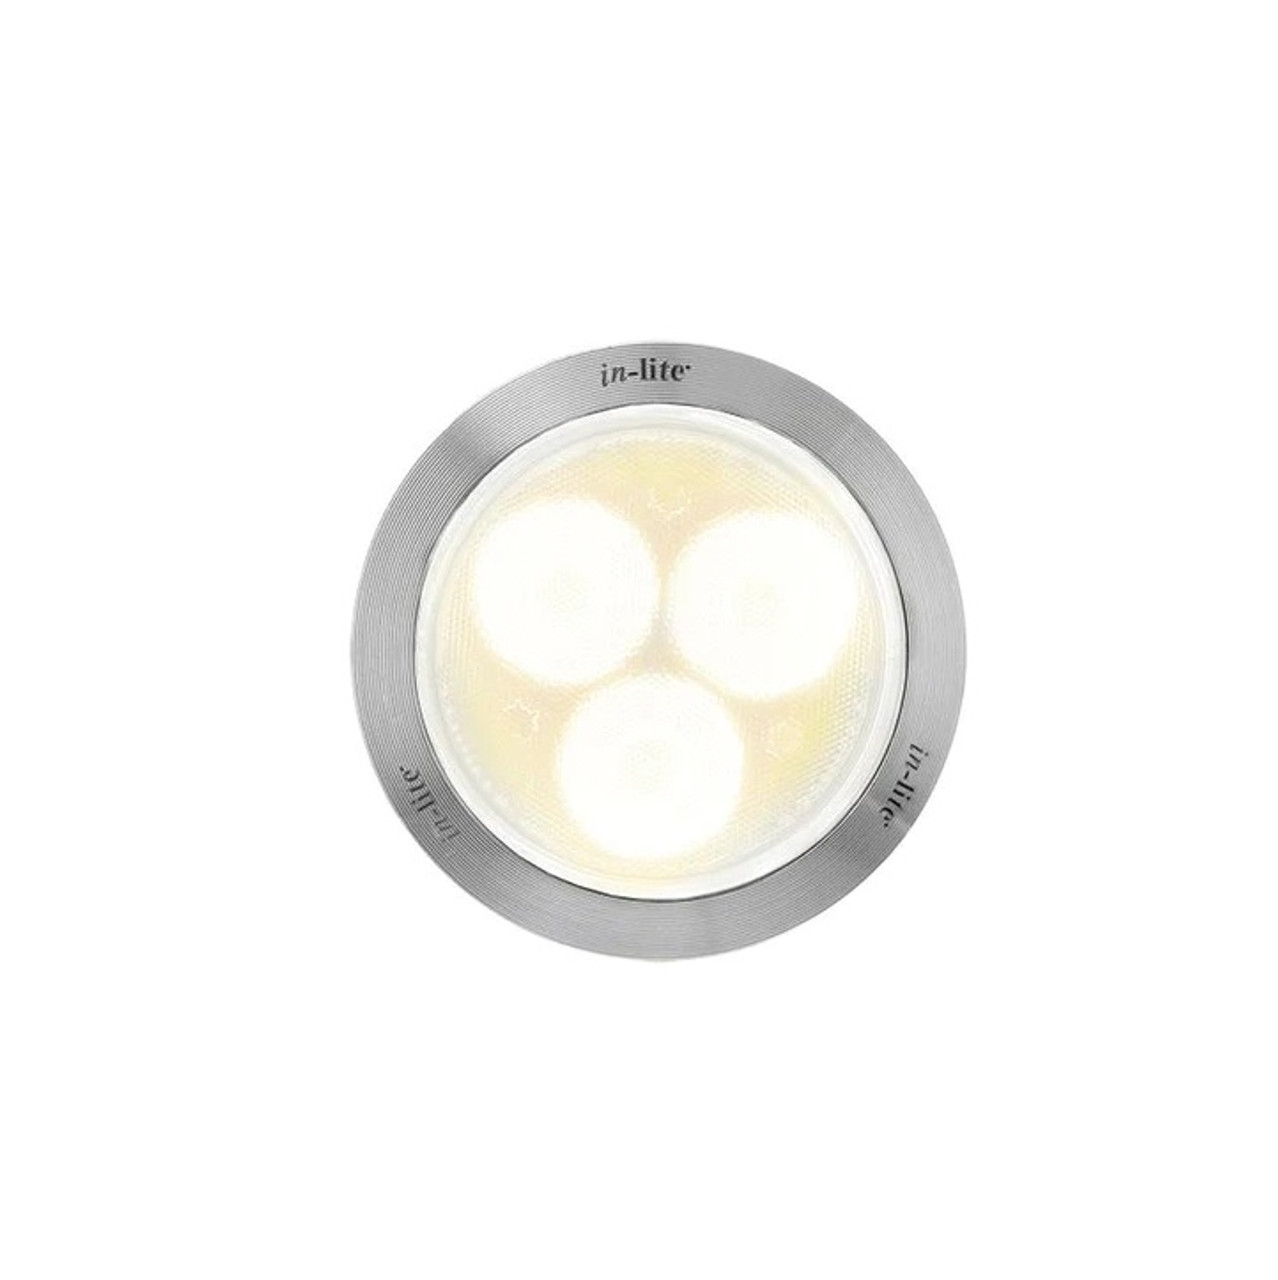 The FLUX packs a punch. This 2 3/8” recessed fixture is designed for illuminating objects up to 16 feet tall. Finished with a stainless steel ring, the FLUX is perfect for lighting up walls, posts, and various other objects from the ground up. 